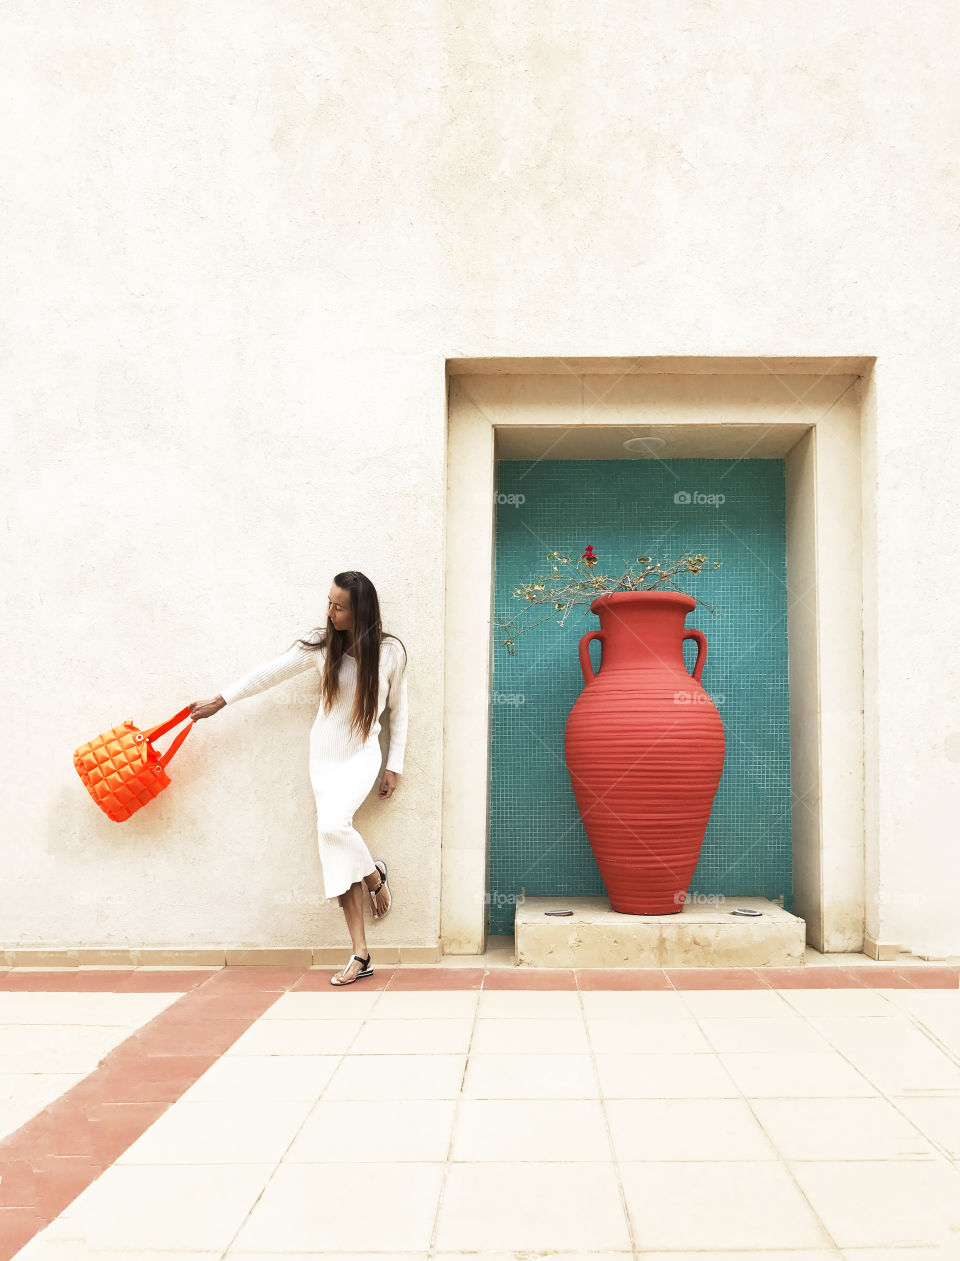 Young woman wearing white dress and holding a bright orange purse standing nearby huge orange jar